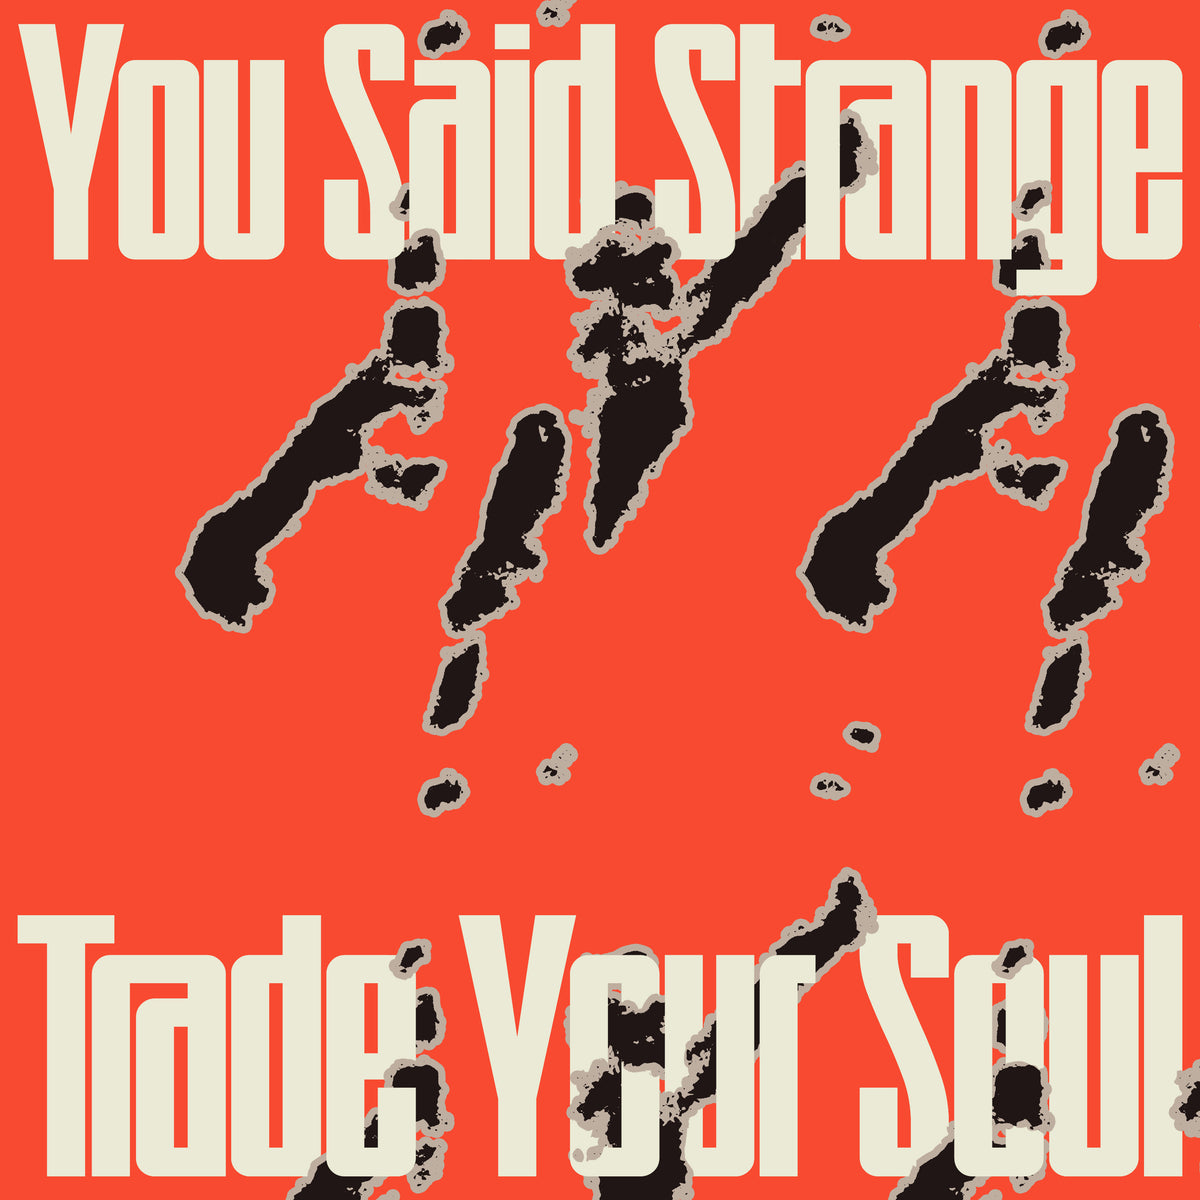 Trade Your Soul EP